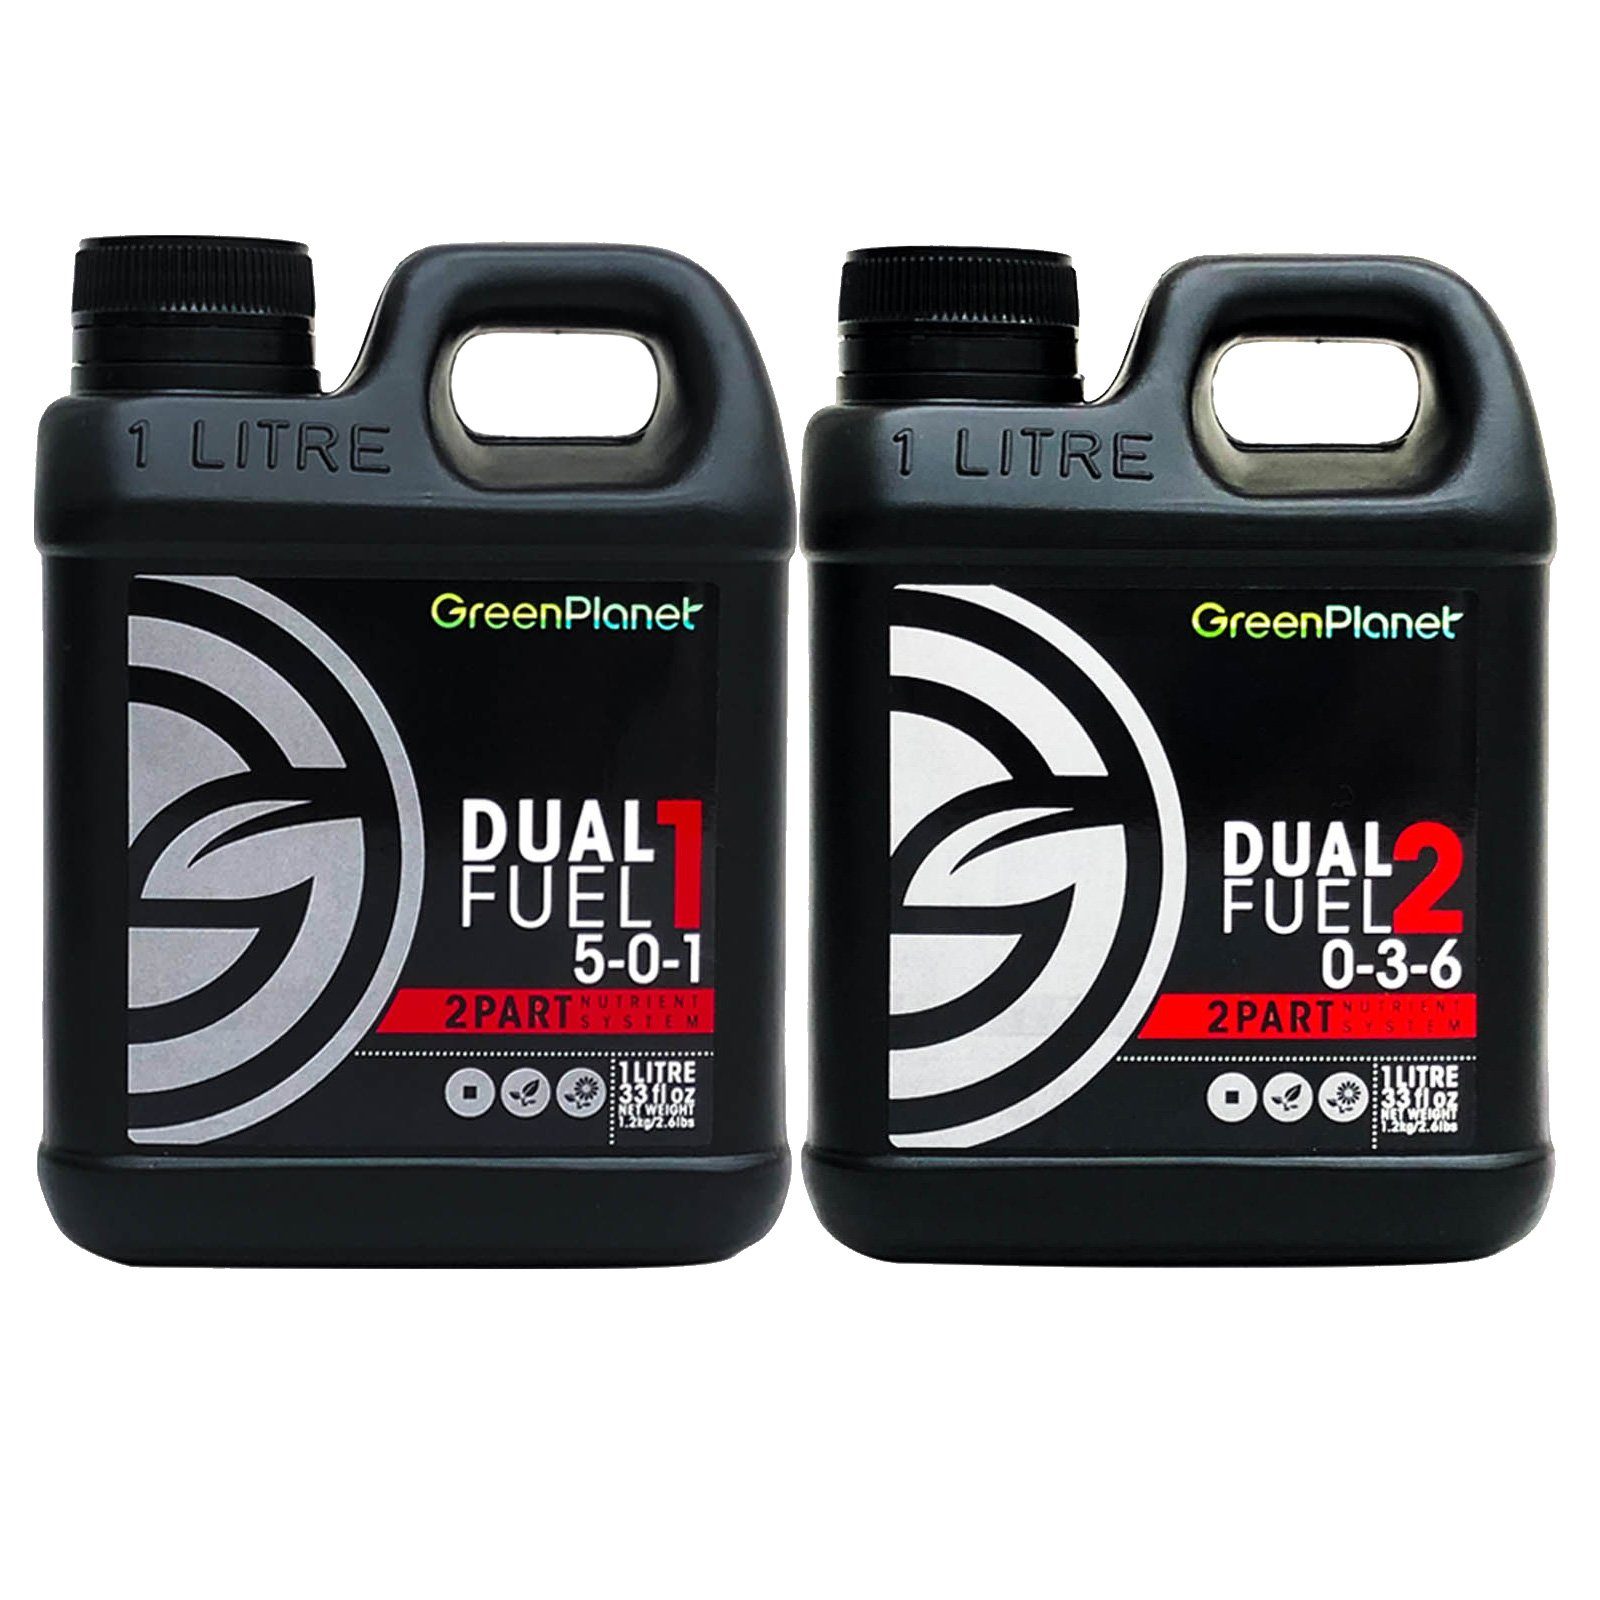 Dual Fuel by Green Planet